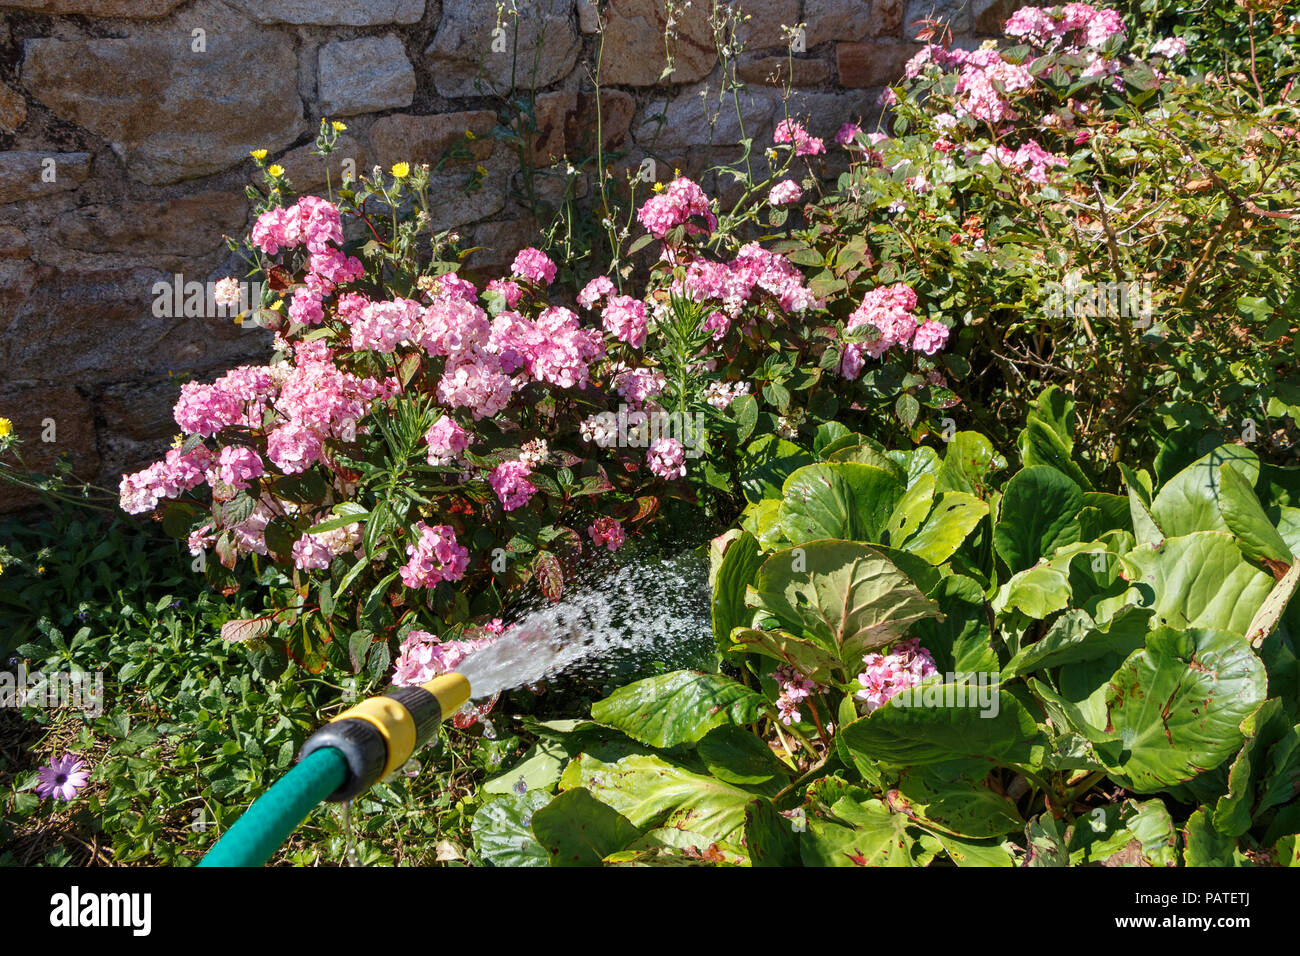 Watering plants and flowers with a garden hose during summer Stock Photo